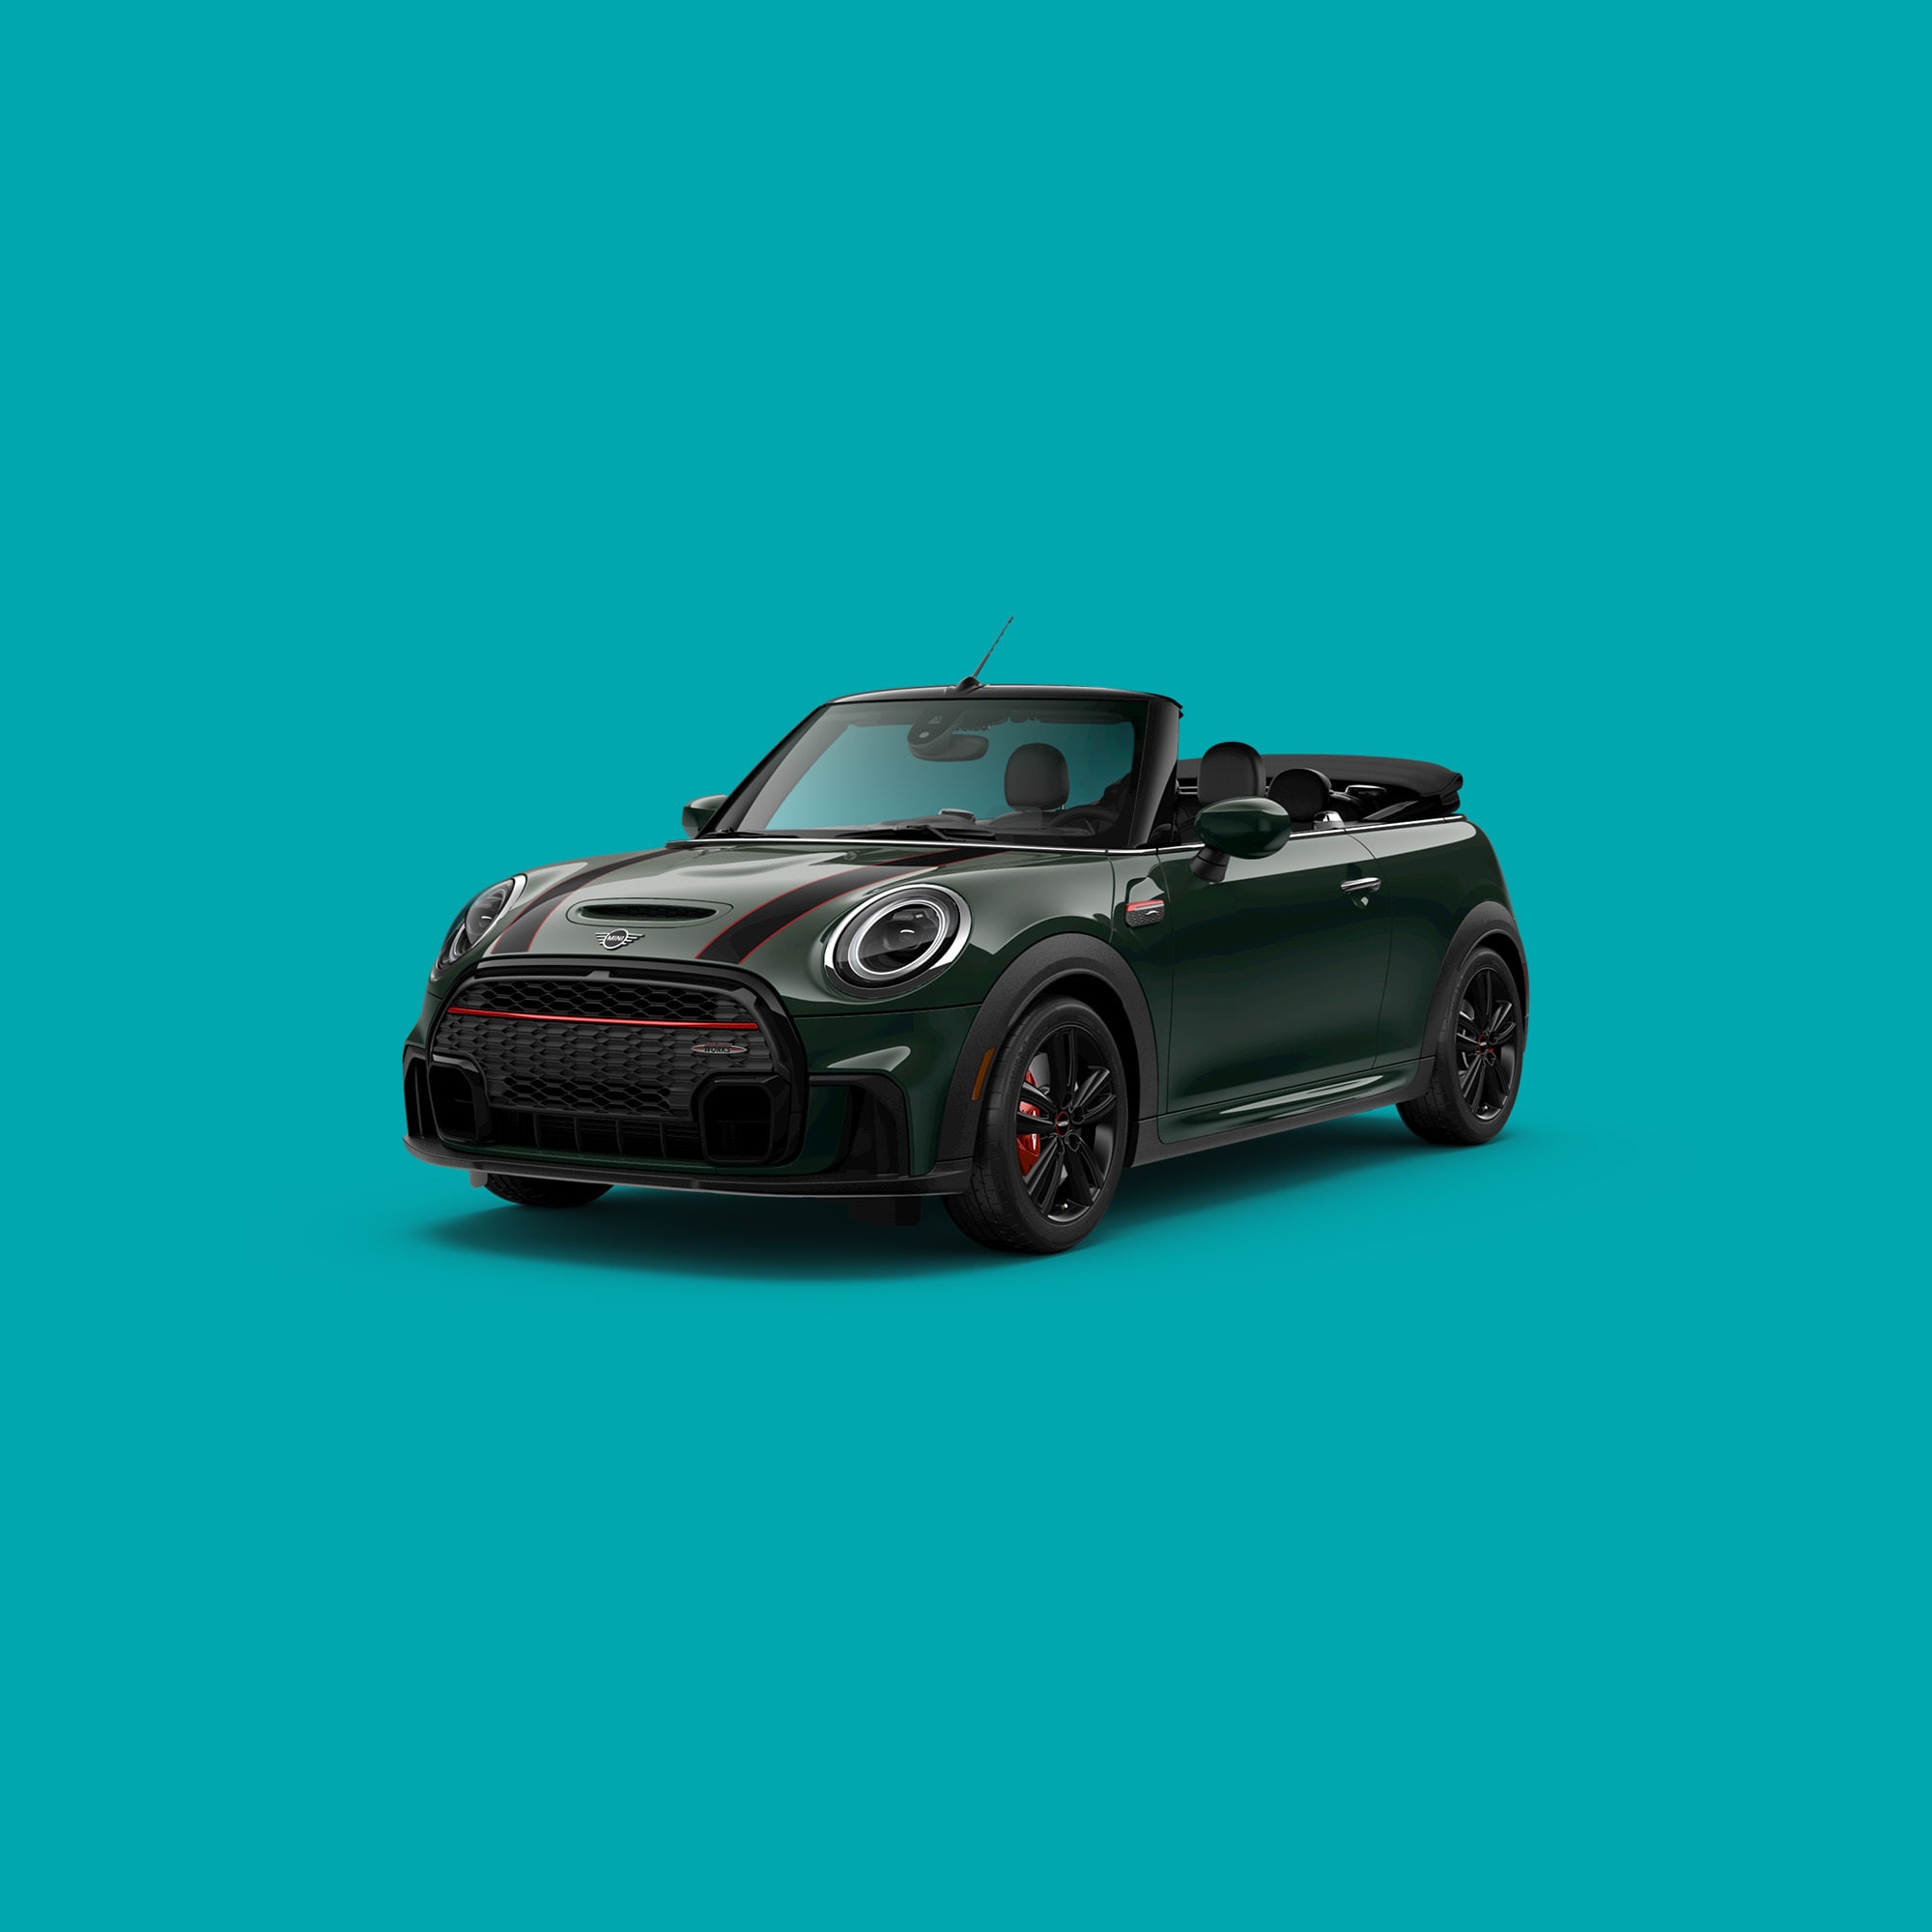 Angled front-to-rear view of a MINI JCW Convertible in John Cooper Works Rebel Green, against a turquoise backdrop.